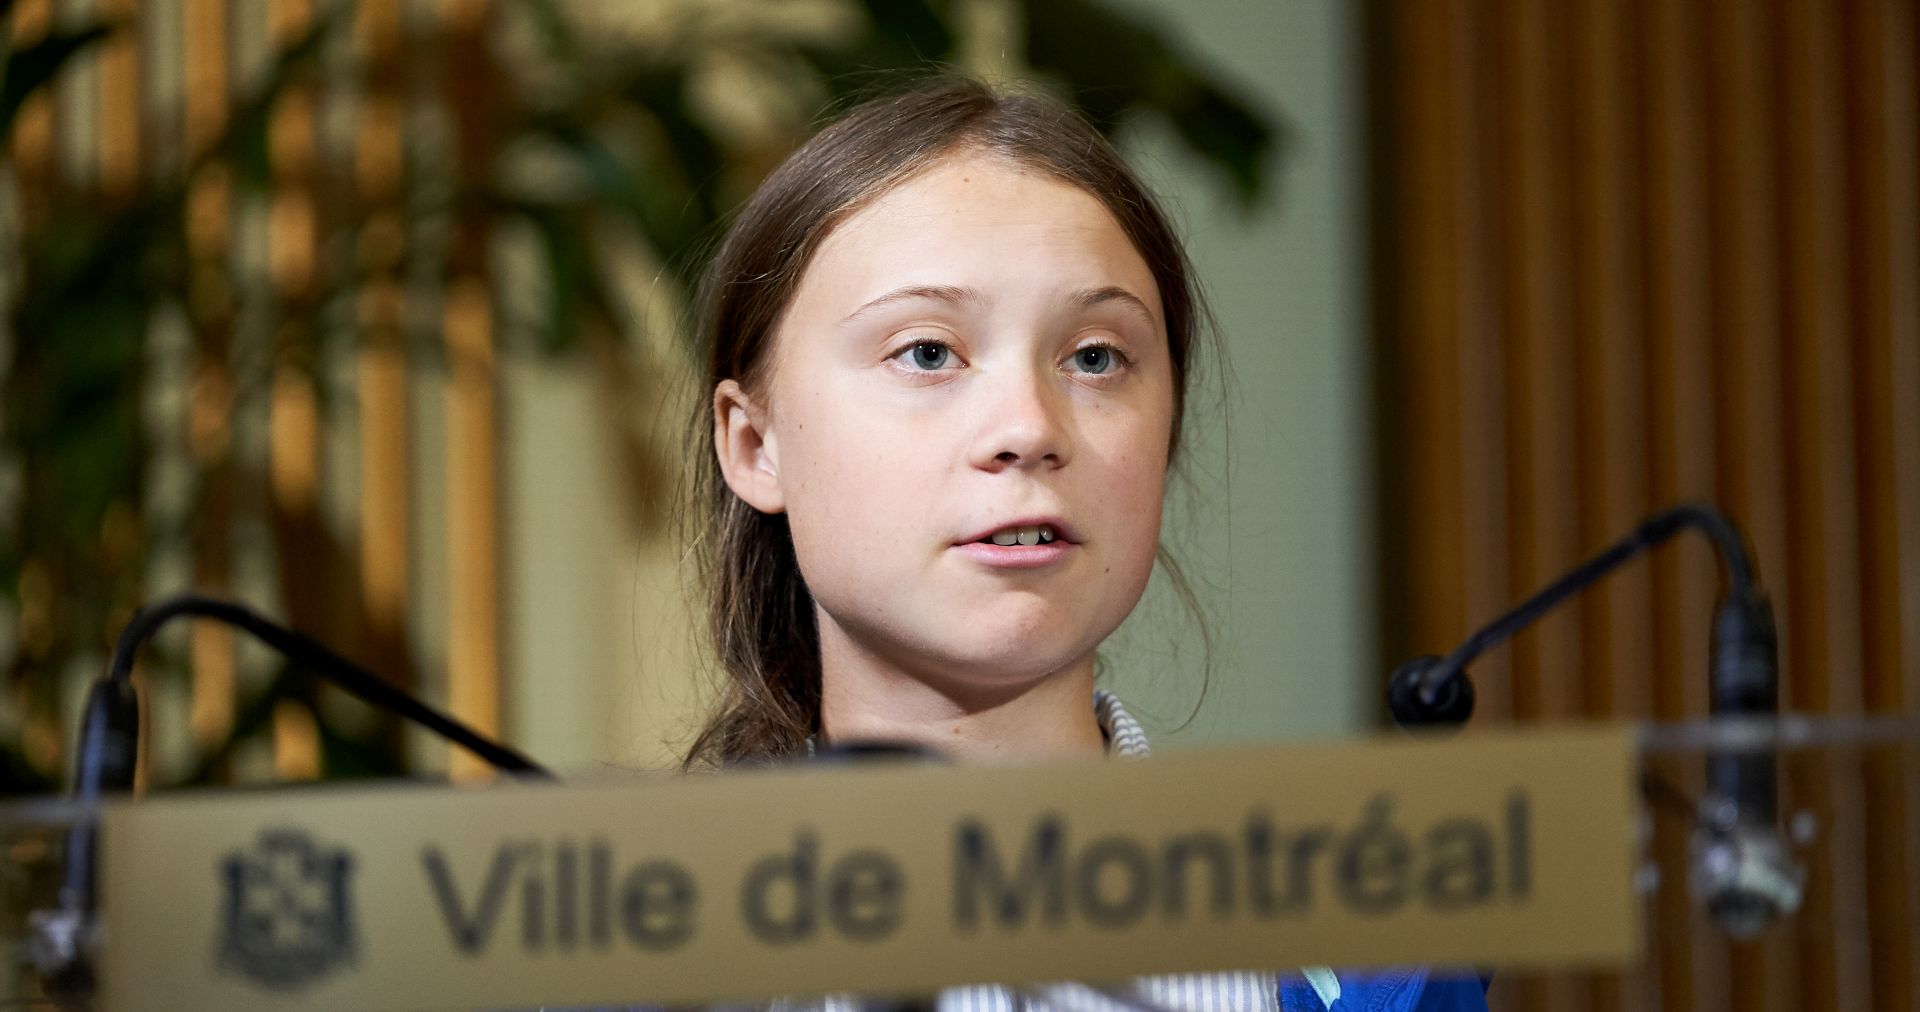 epa07875342 Swedish climate activist Greta Thunberg speaks at the Montreal city hall after she received the key to the city from the Mayor of Montreal Valerie Plante (not pictured) following the climate strike in Montreal, Quebec, Canada, 27 September 2019. Thunberg participated in several climate events in Montreal, continuing a month-long series of climate-related appearances in the US and Canada which began with her sailing from England to New York in late August.  EPA/VALERIE BLUM